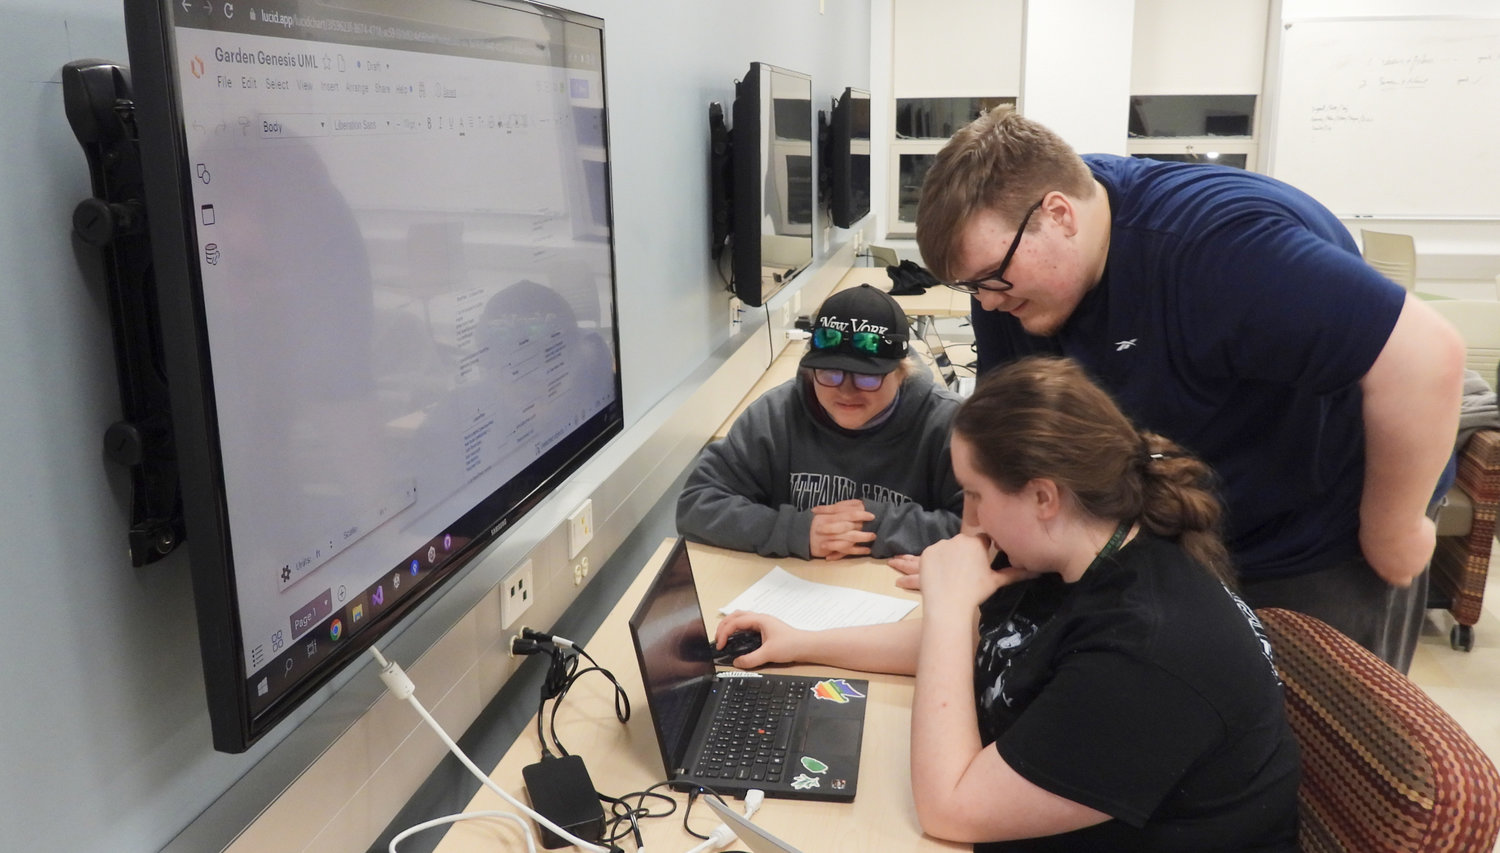 Participants of the SUNY Morrisville 2023 Global Game Jam got right to work on opening day, Friday, Feb. 3, working on a game due on Sunday, Feb. 5. Pictured is Chino Beach at the computer, Alex Woods standing, and Grace Fowler.